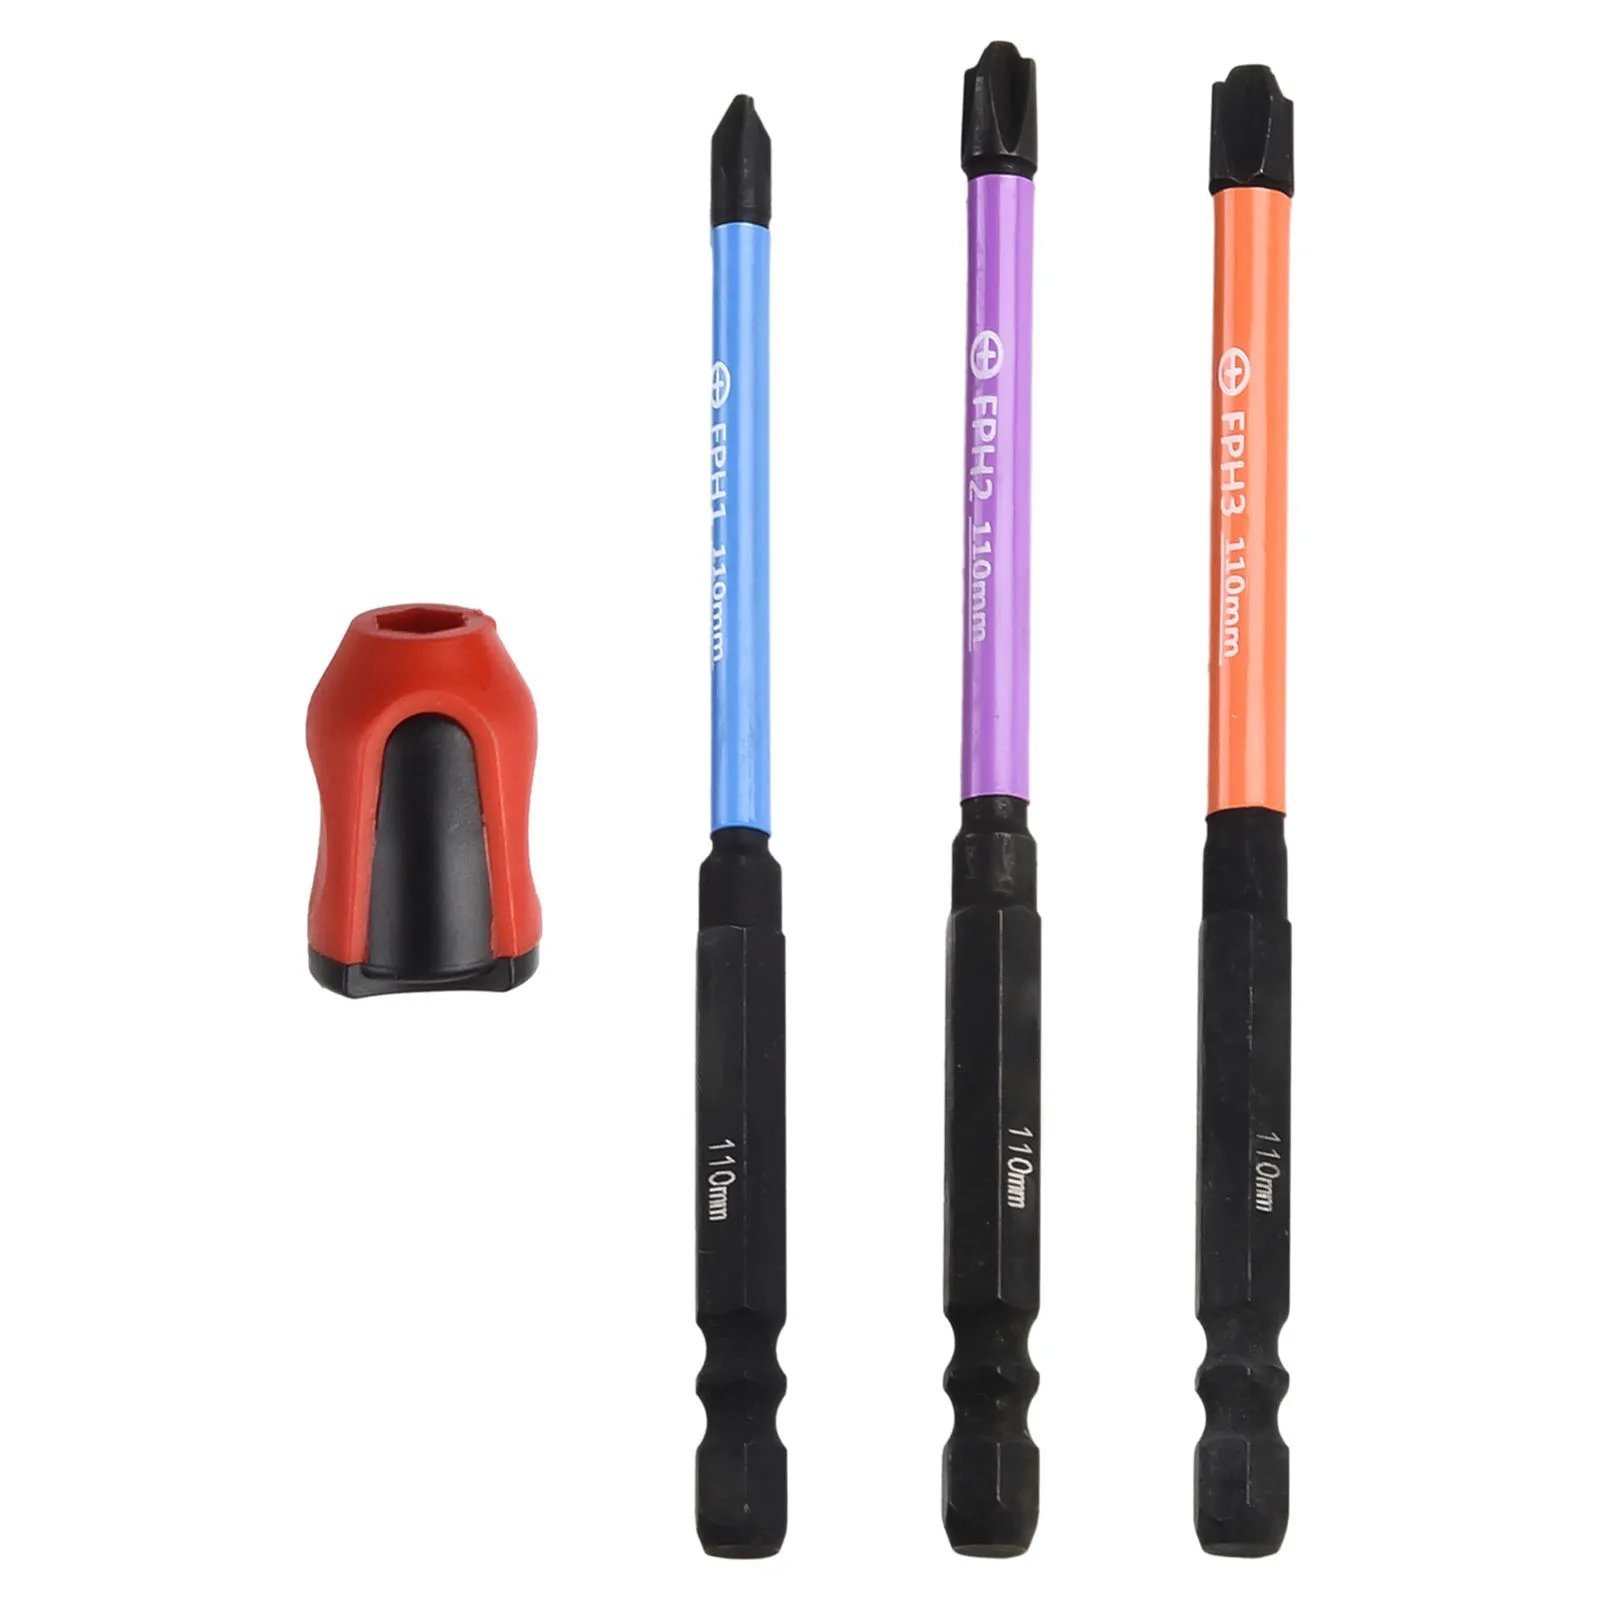 

3pcs 65/110mm Special Slotted Cross Screwdriver Bit With Magnetic Ring Electrician FPH FPZ Screw Driver Bit For Socket Switch